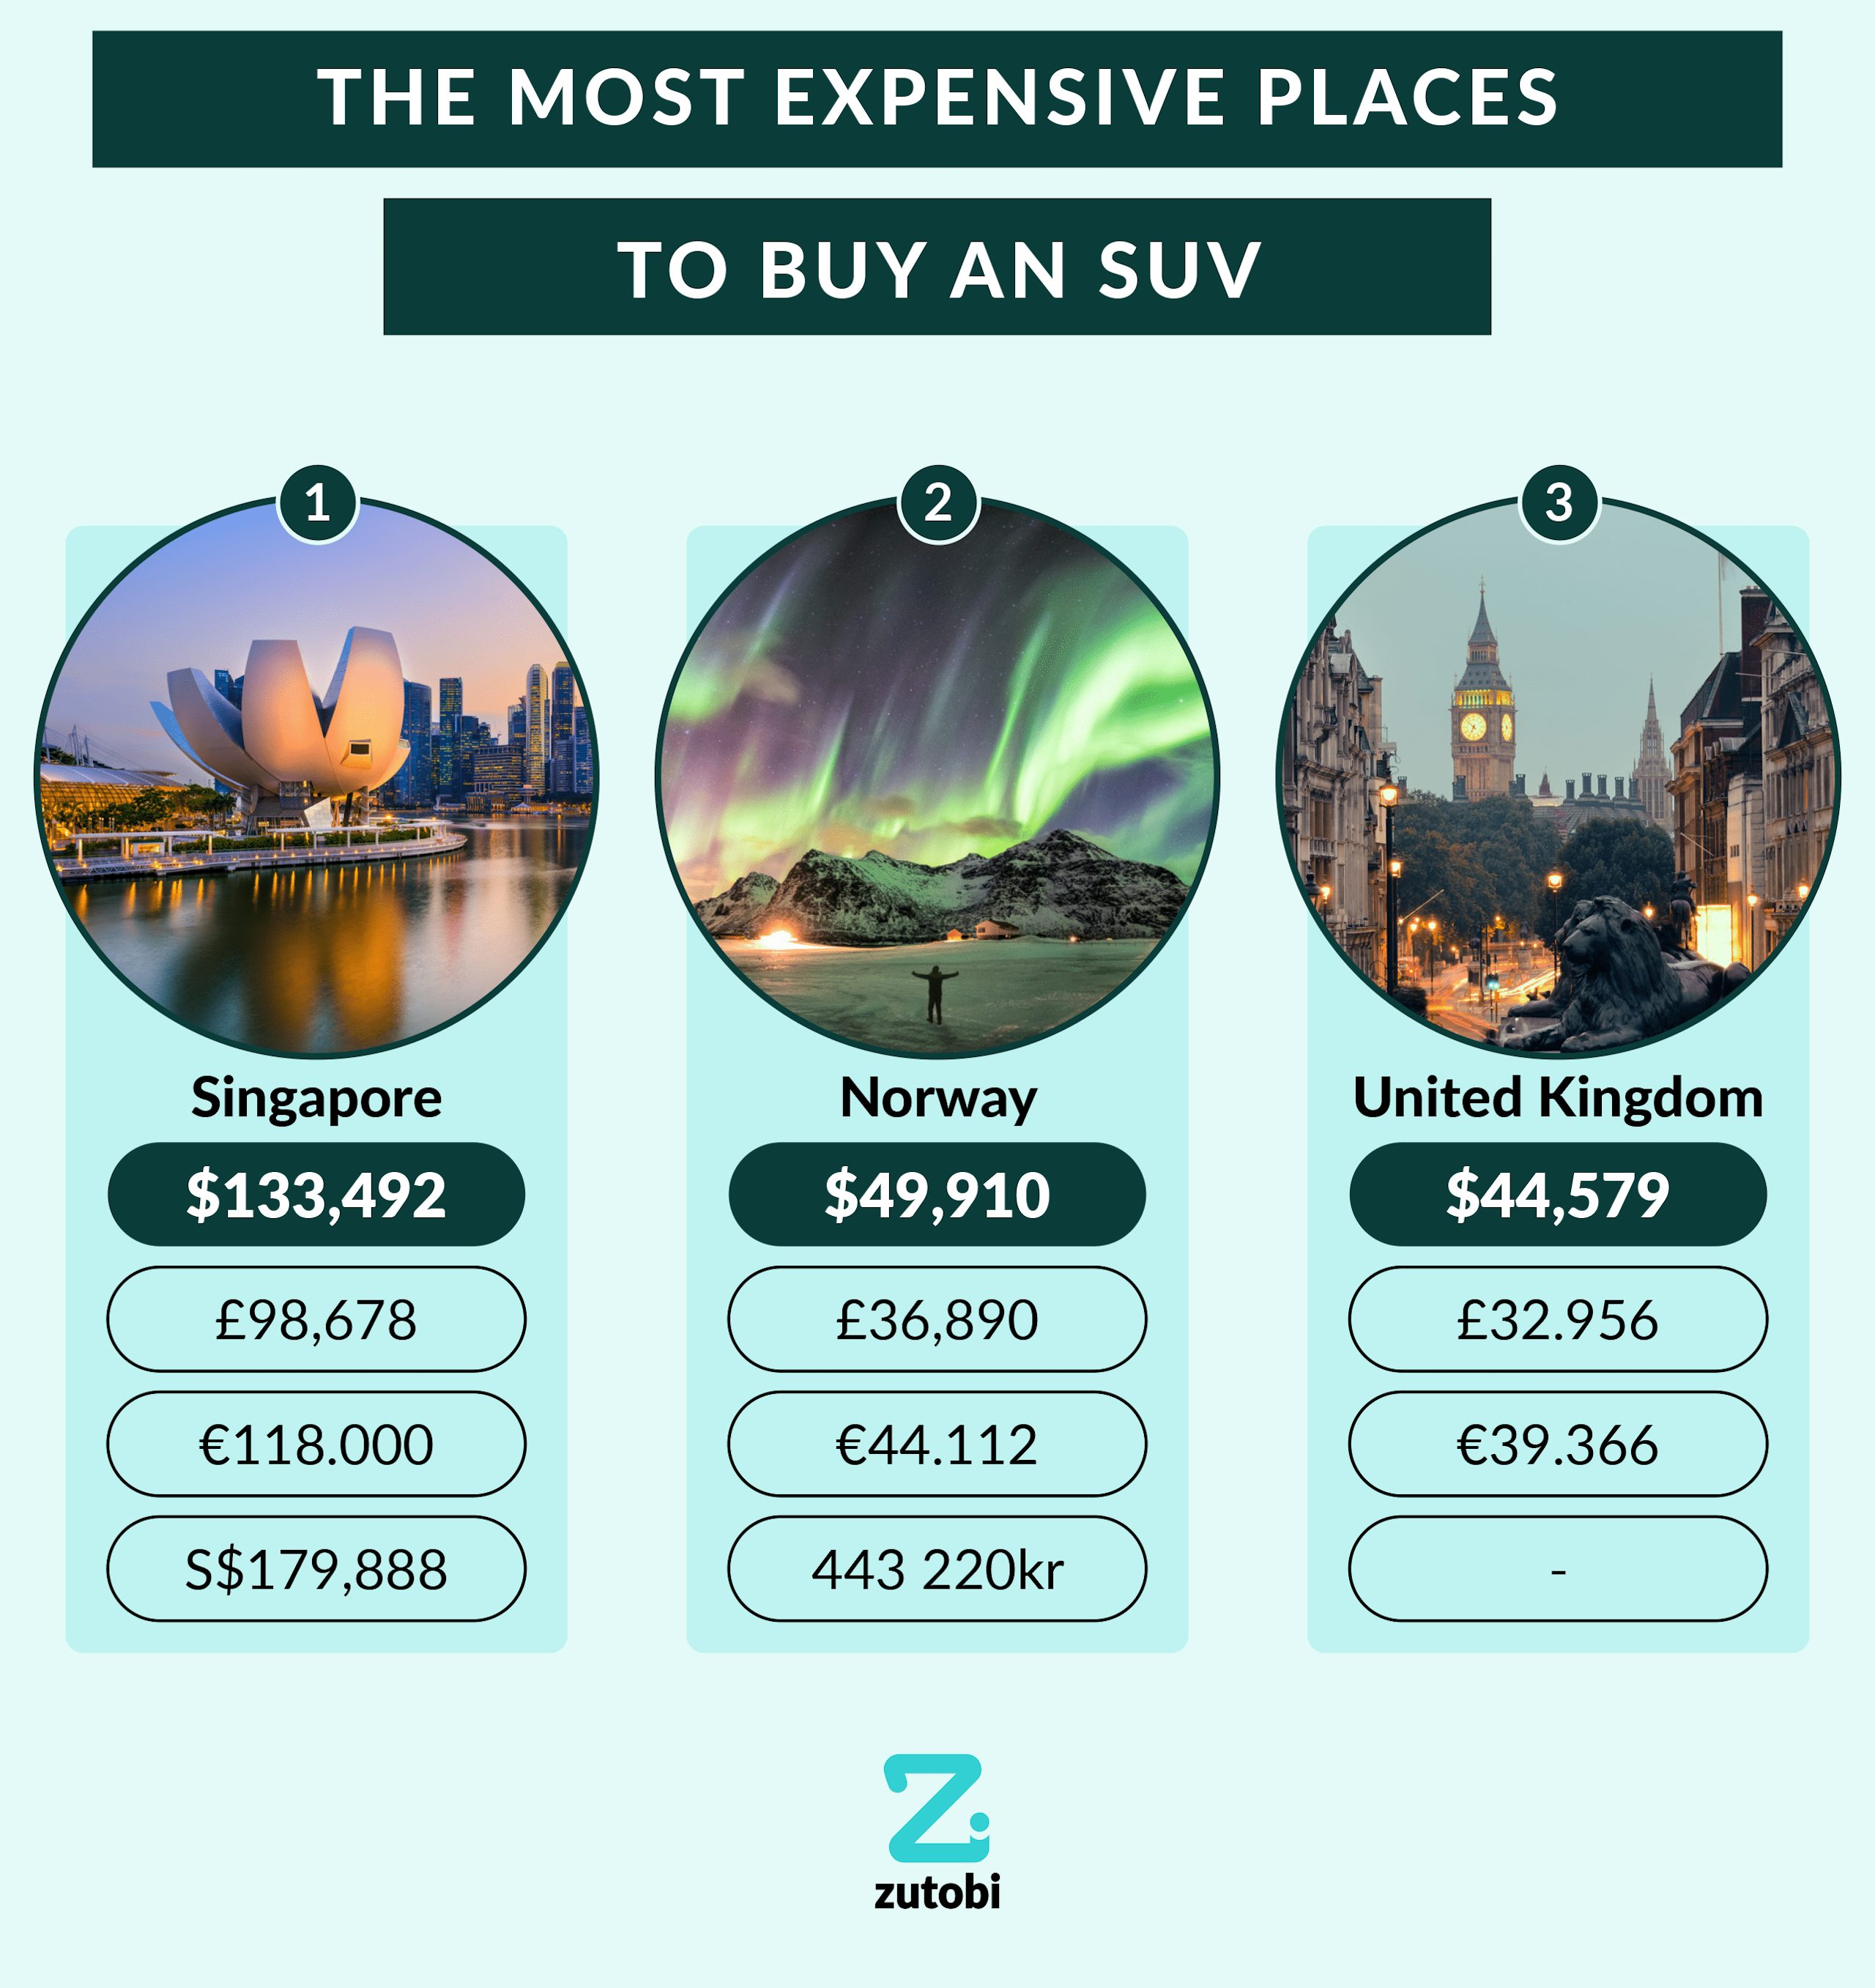 The Most Expensive Places to Buy an SUV